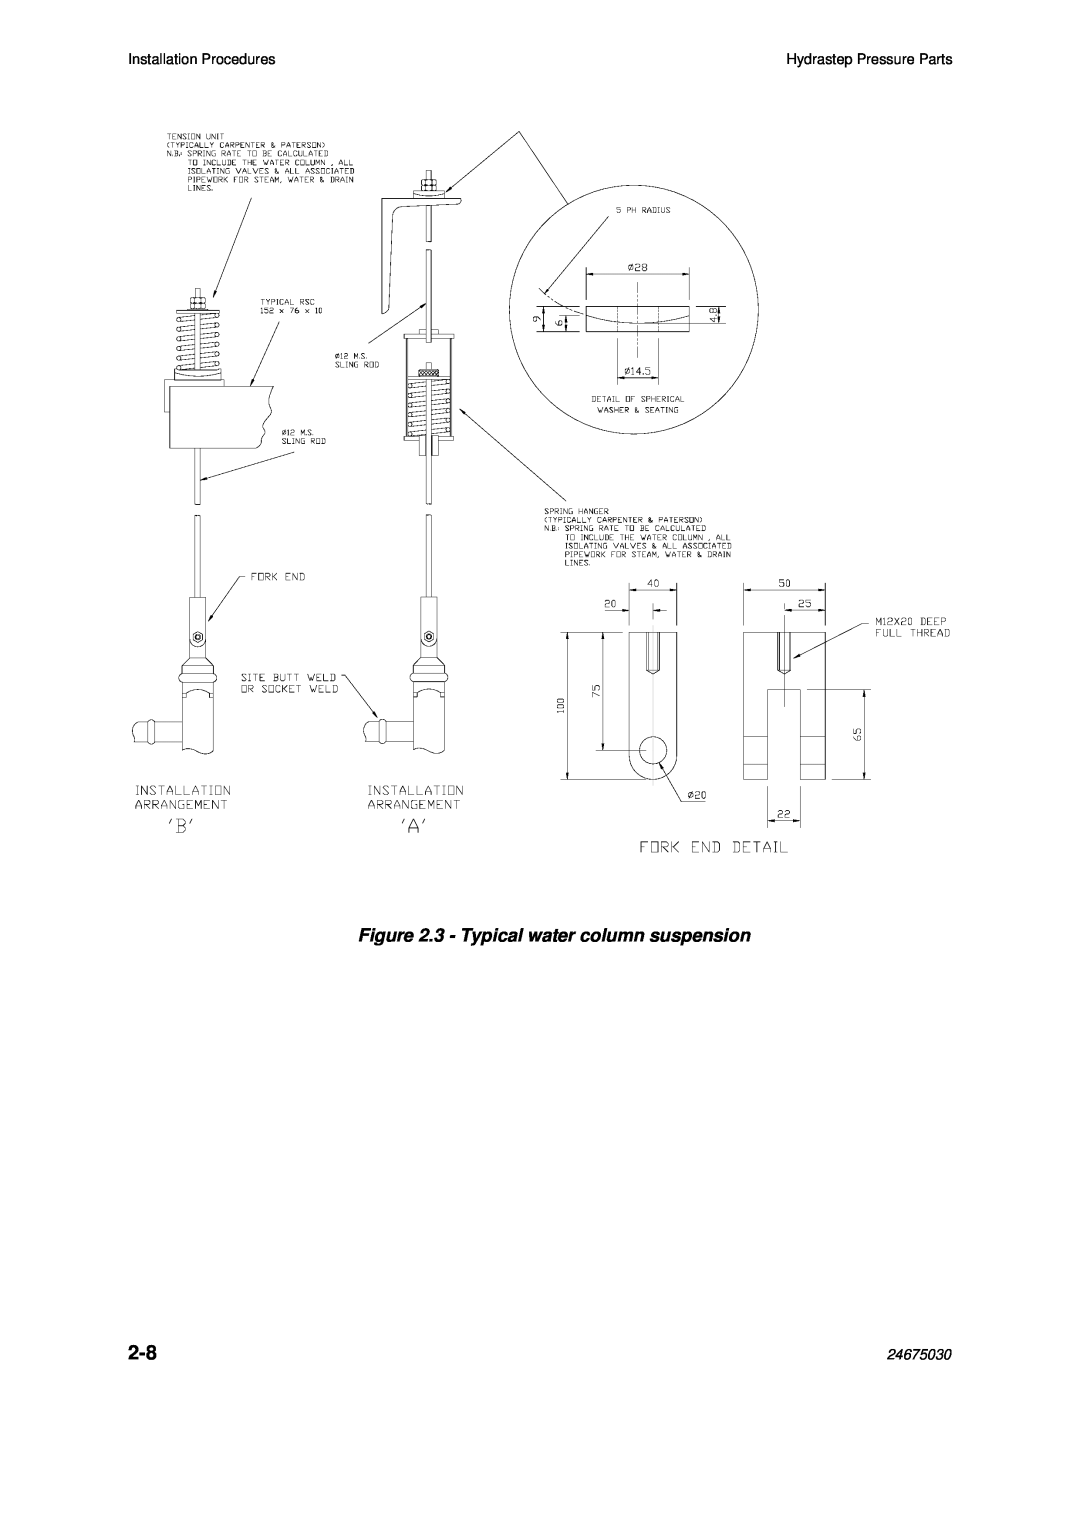 Emerson 2468CB, 2468CD manual 3 - Typical water column suspension, Installation Procedures, 24675030 